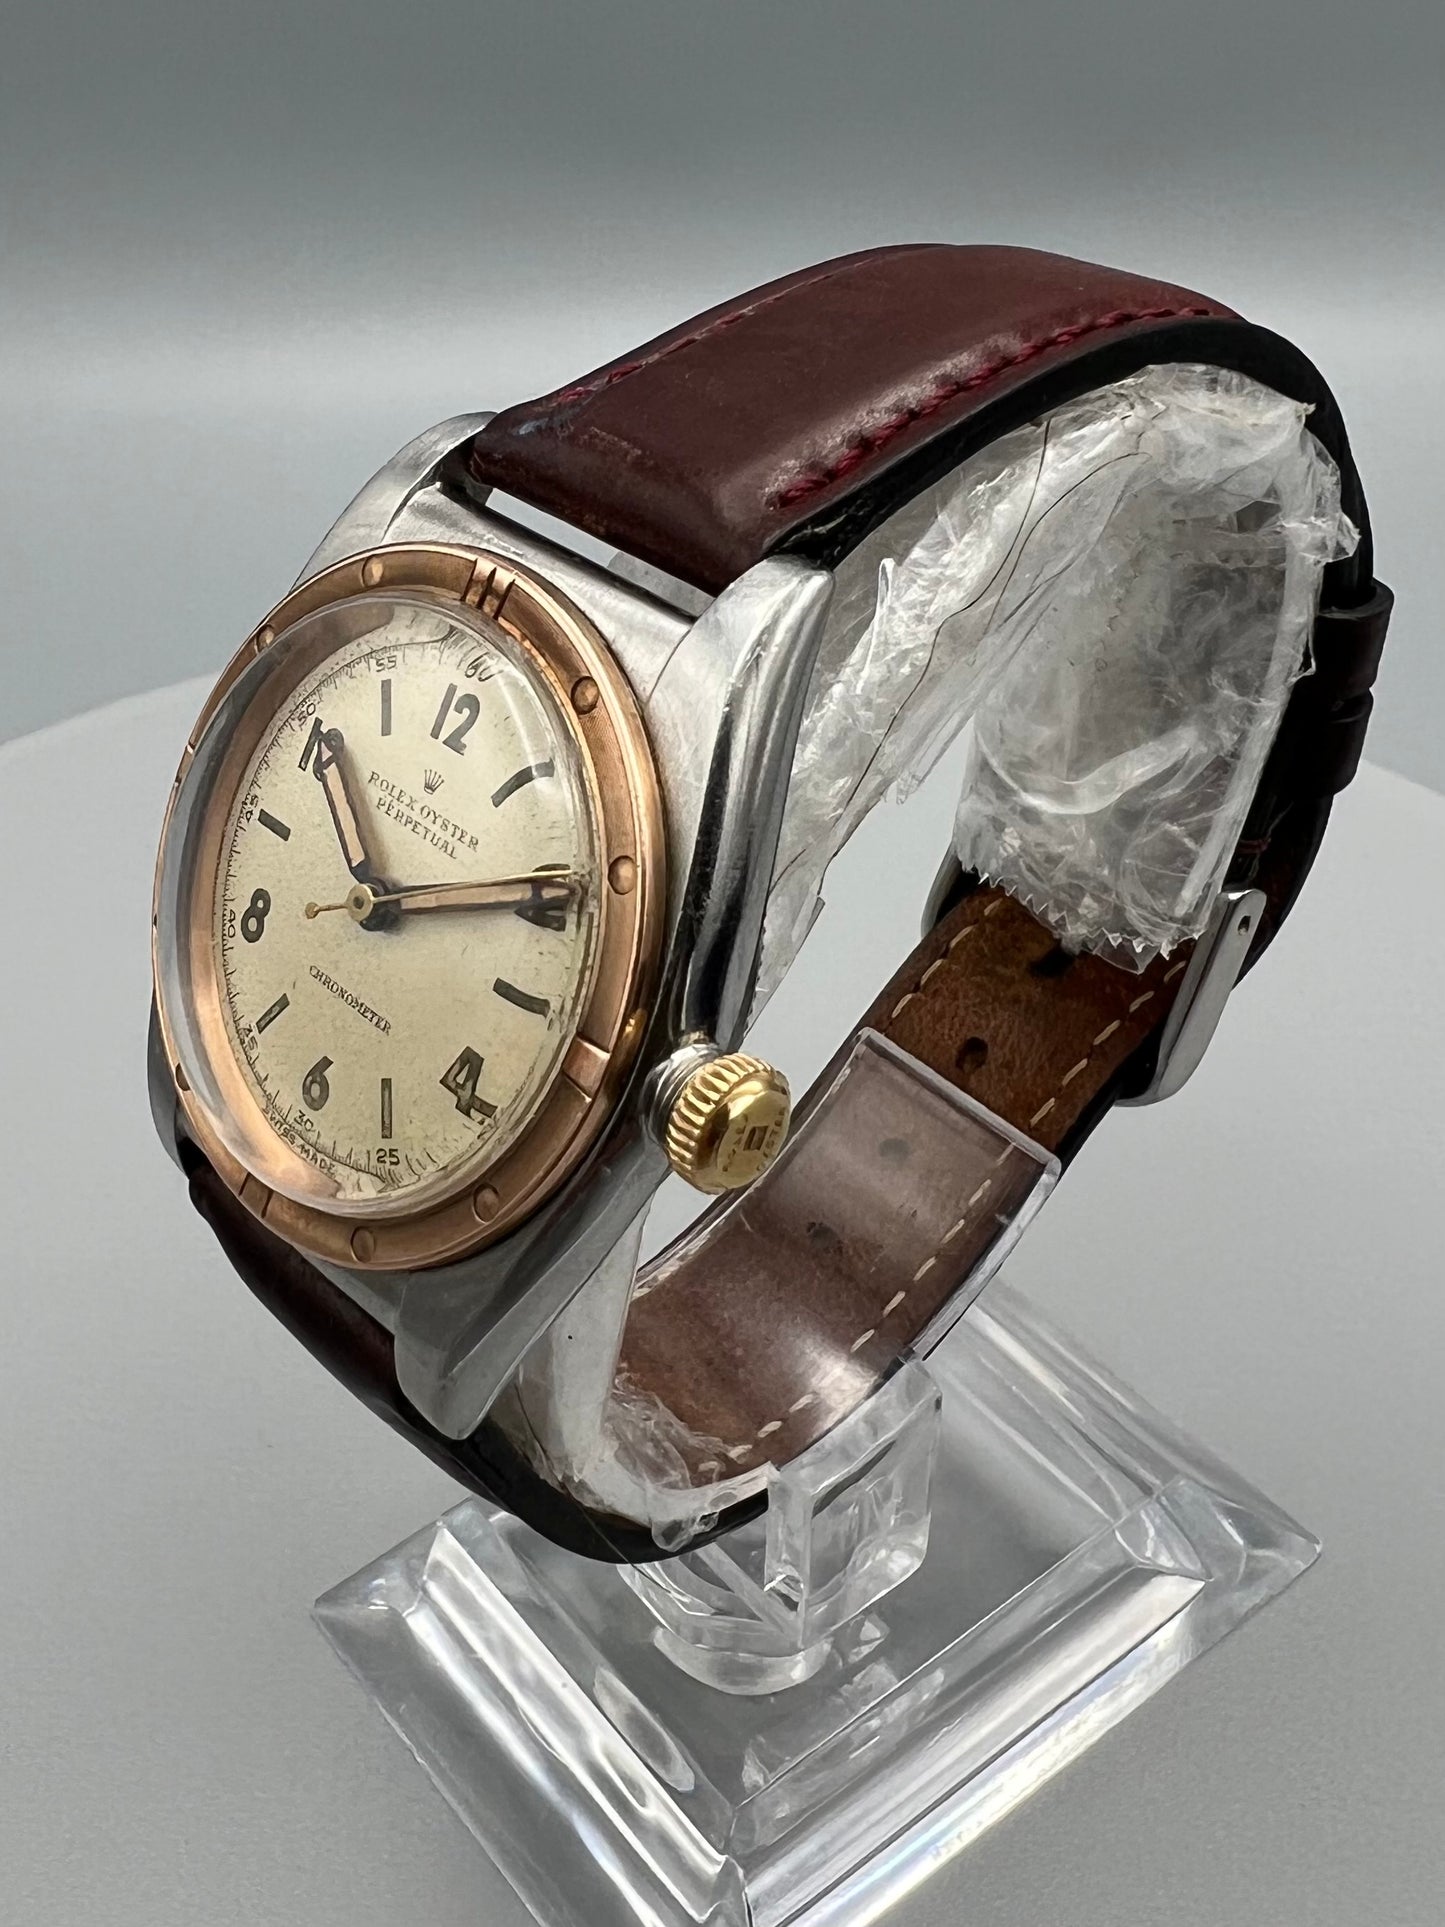 Rolex Ref 3372 Oyster Perpetual ‘Bubbleback’ Stainless Steel and Rose Gold Watch, circa 1945